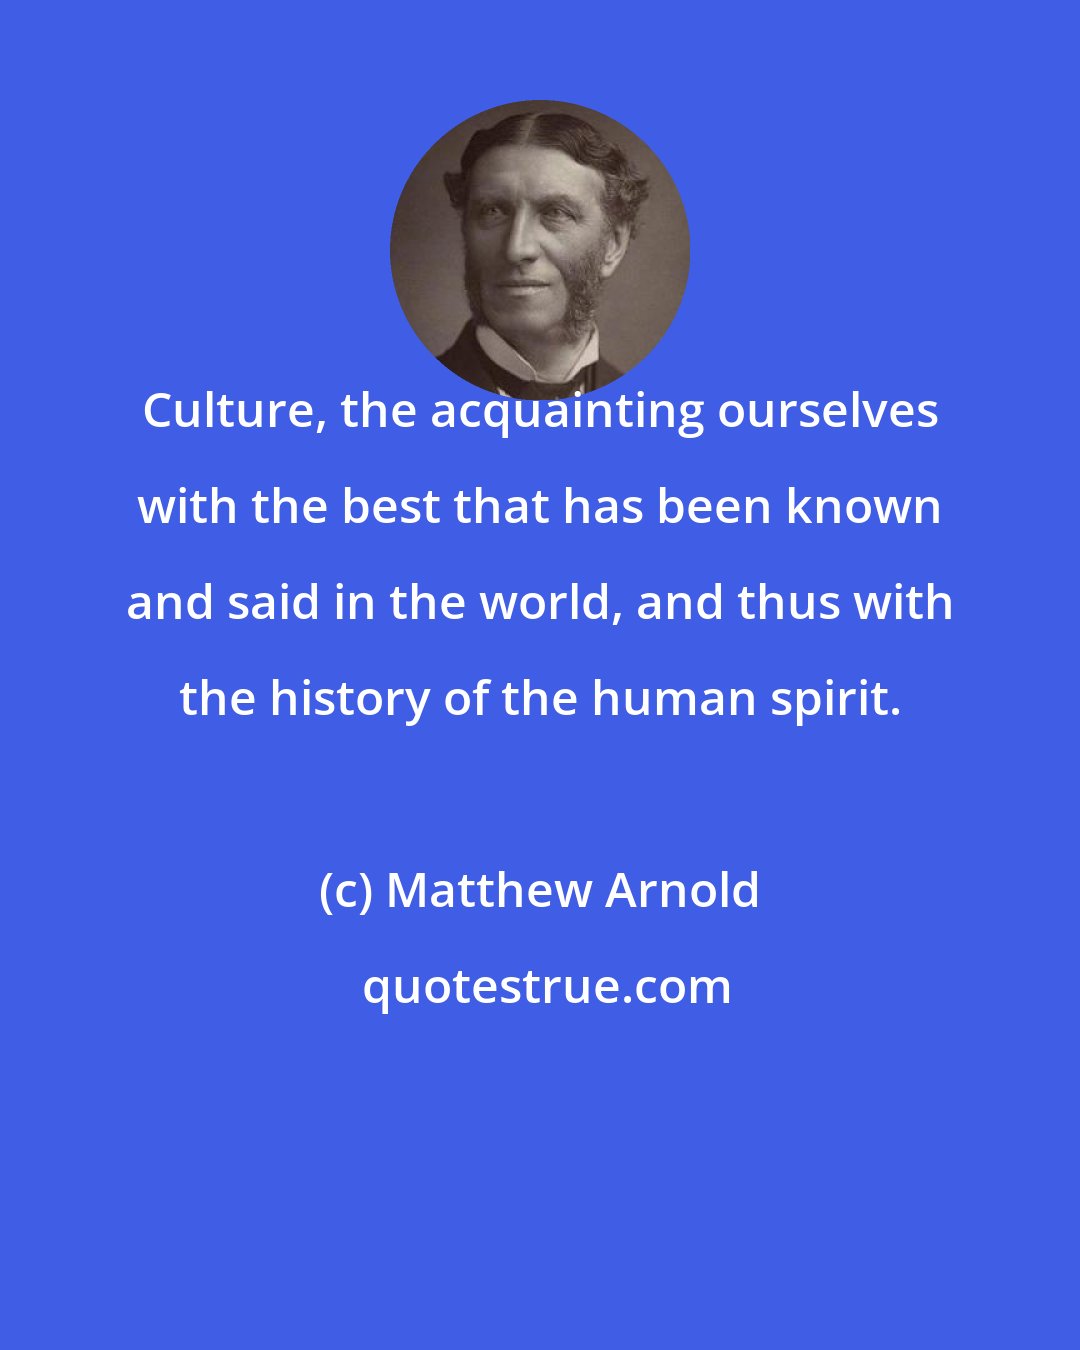 Matthew Arnold: Culture, the acquainting ourselves with the best that has been known and said in the world, and thus with the history of the human spirit.